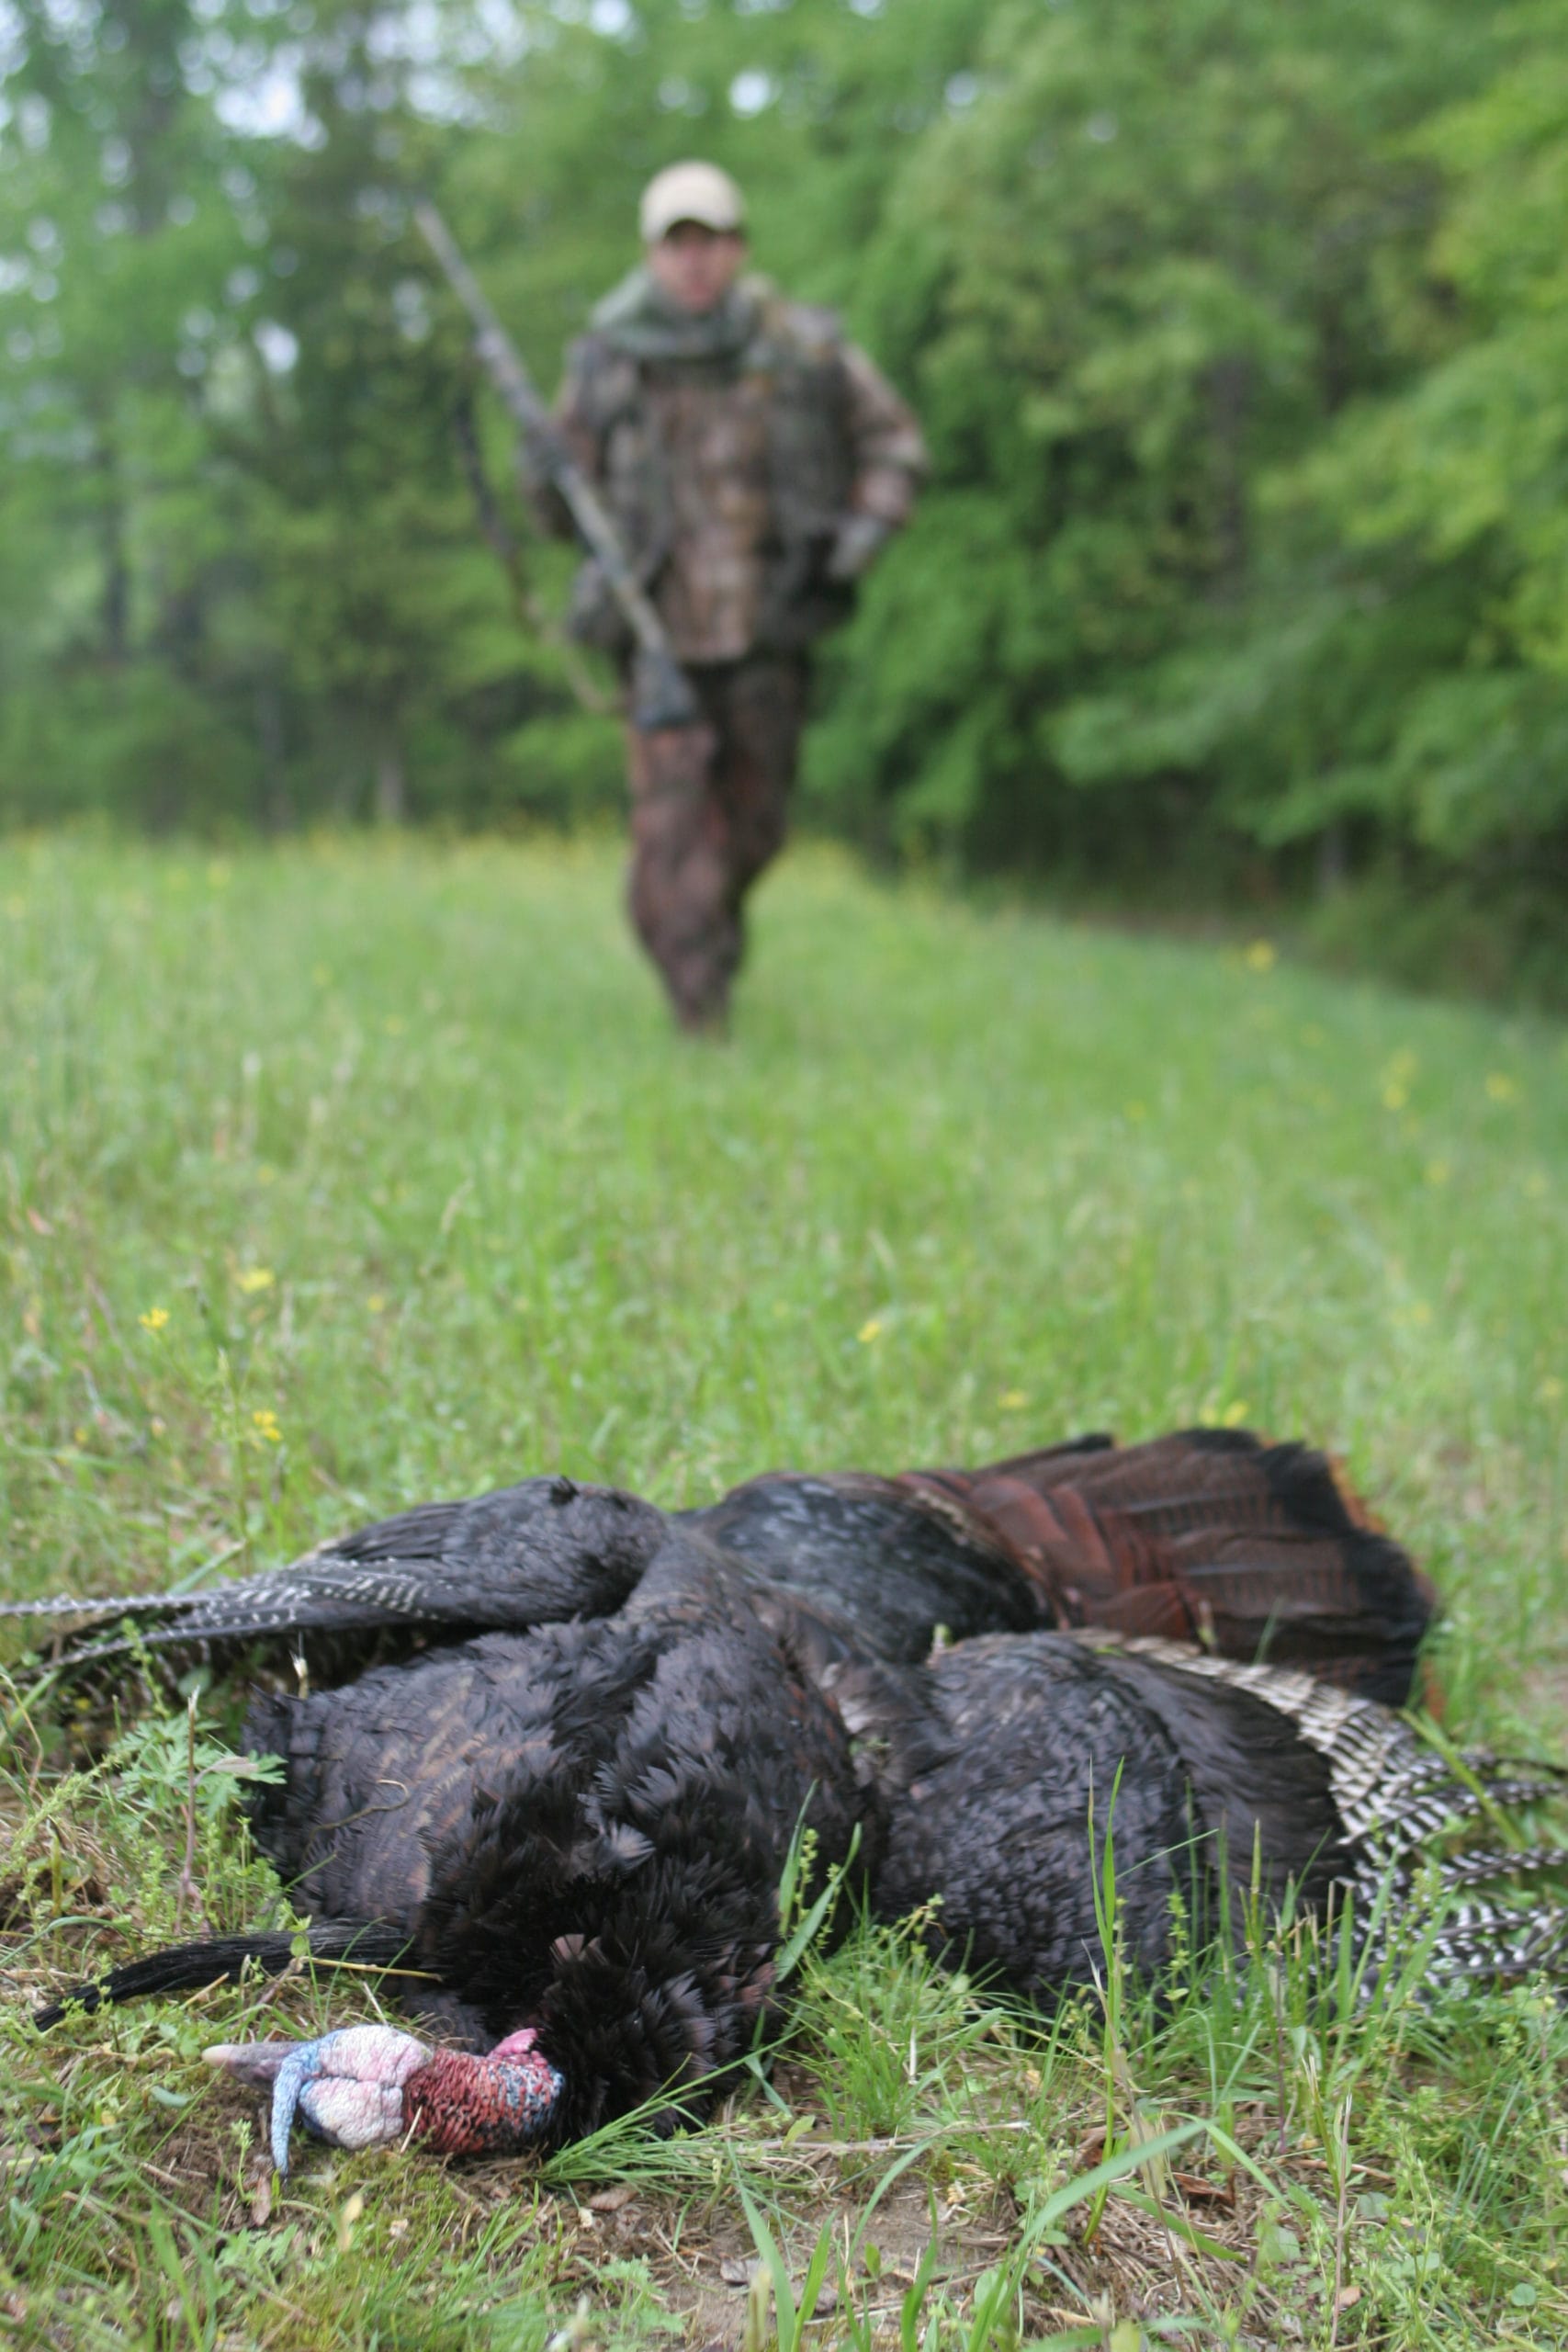 A gobbler doesn’t have to be gobbling every five minutes for a hunt to be successful. Be patient, and be prepared for a silent bird that may be making its way toward your calling.